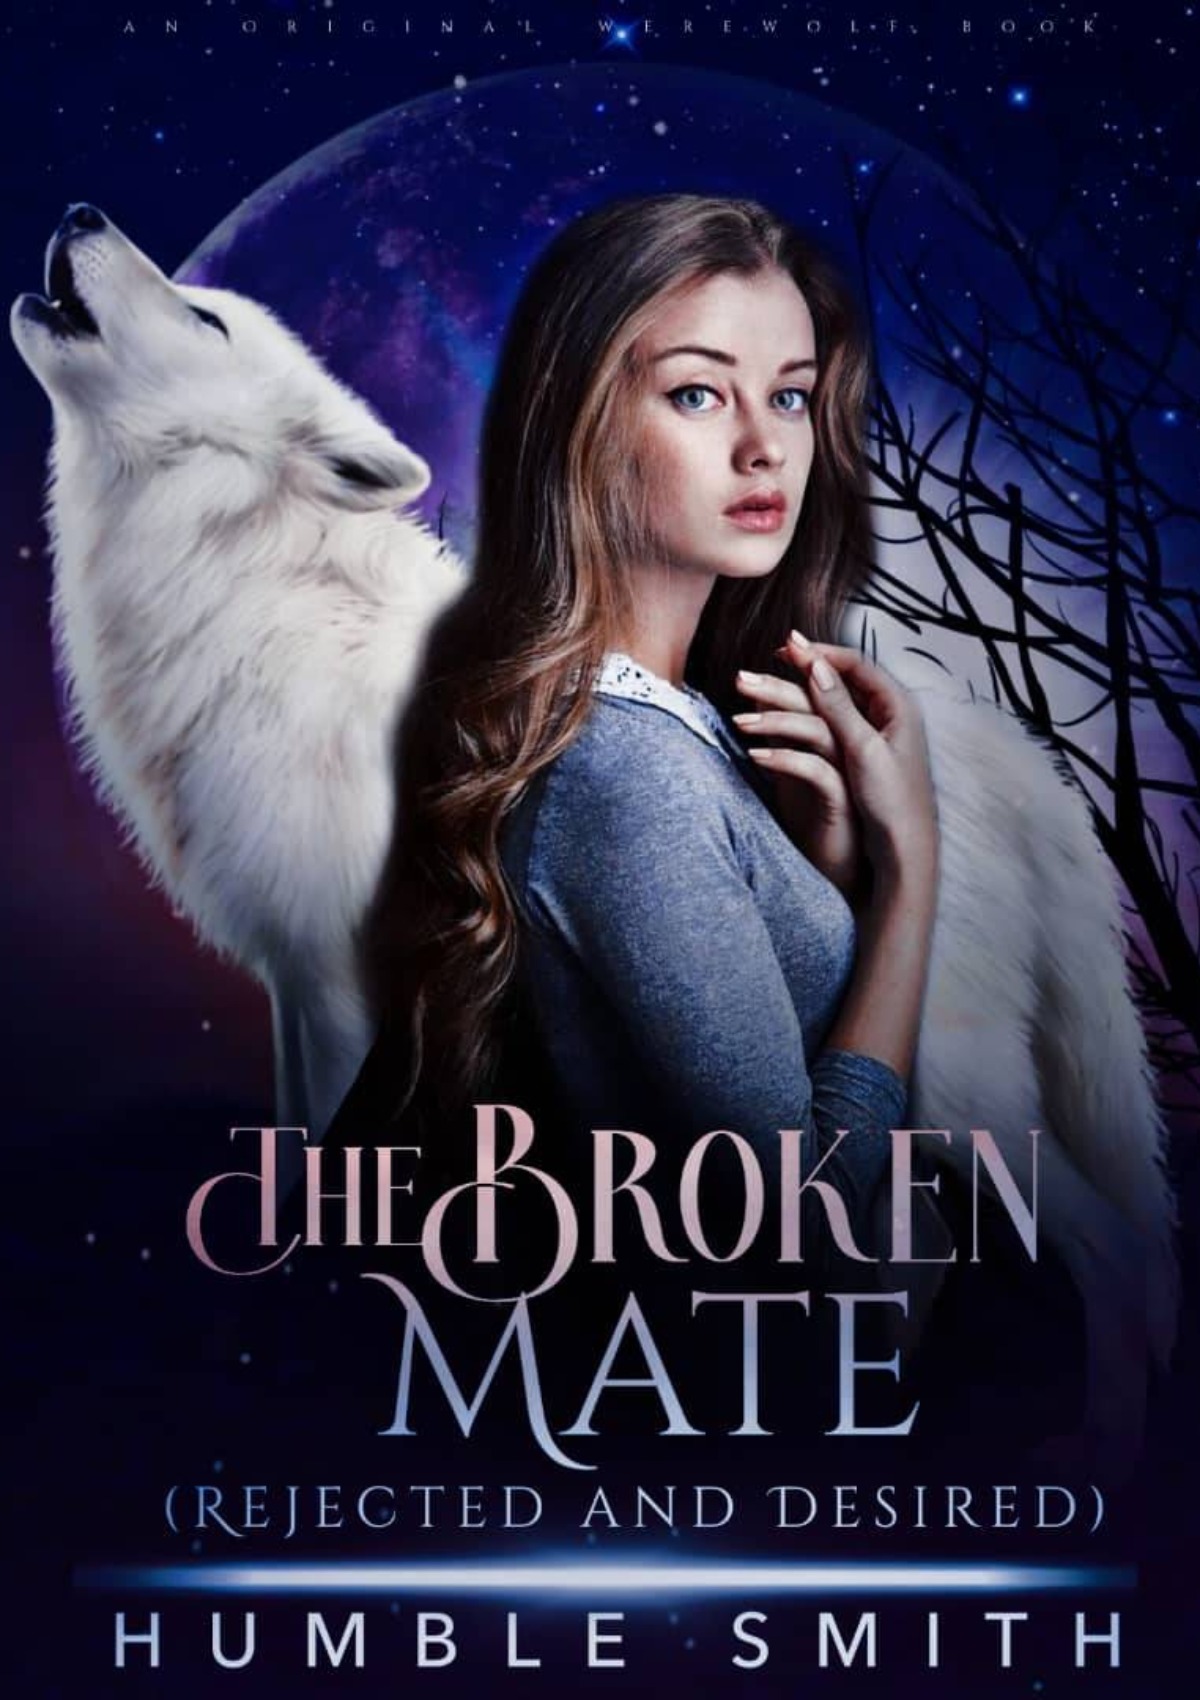 The Broken Mate - Rejected And Desired